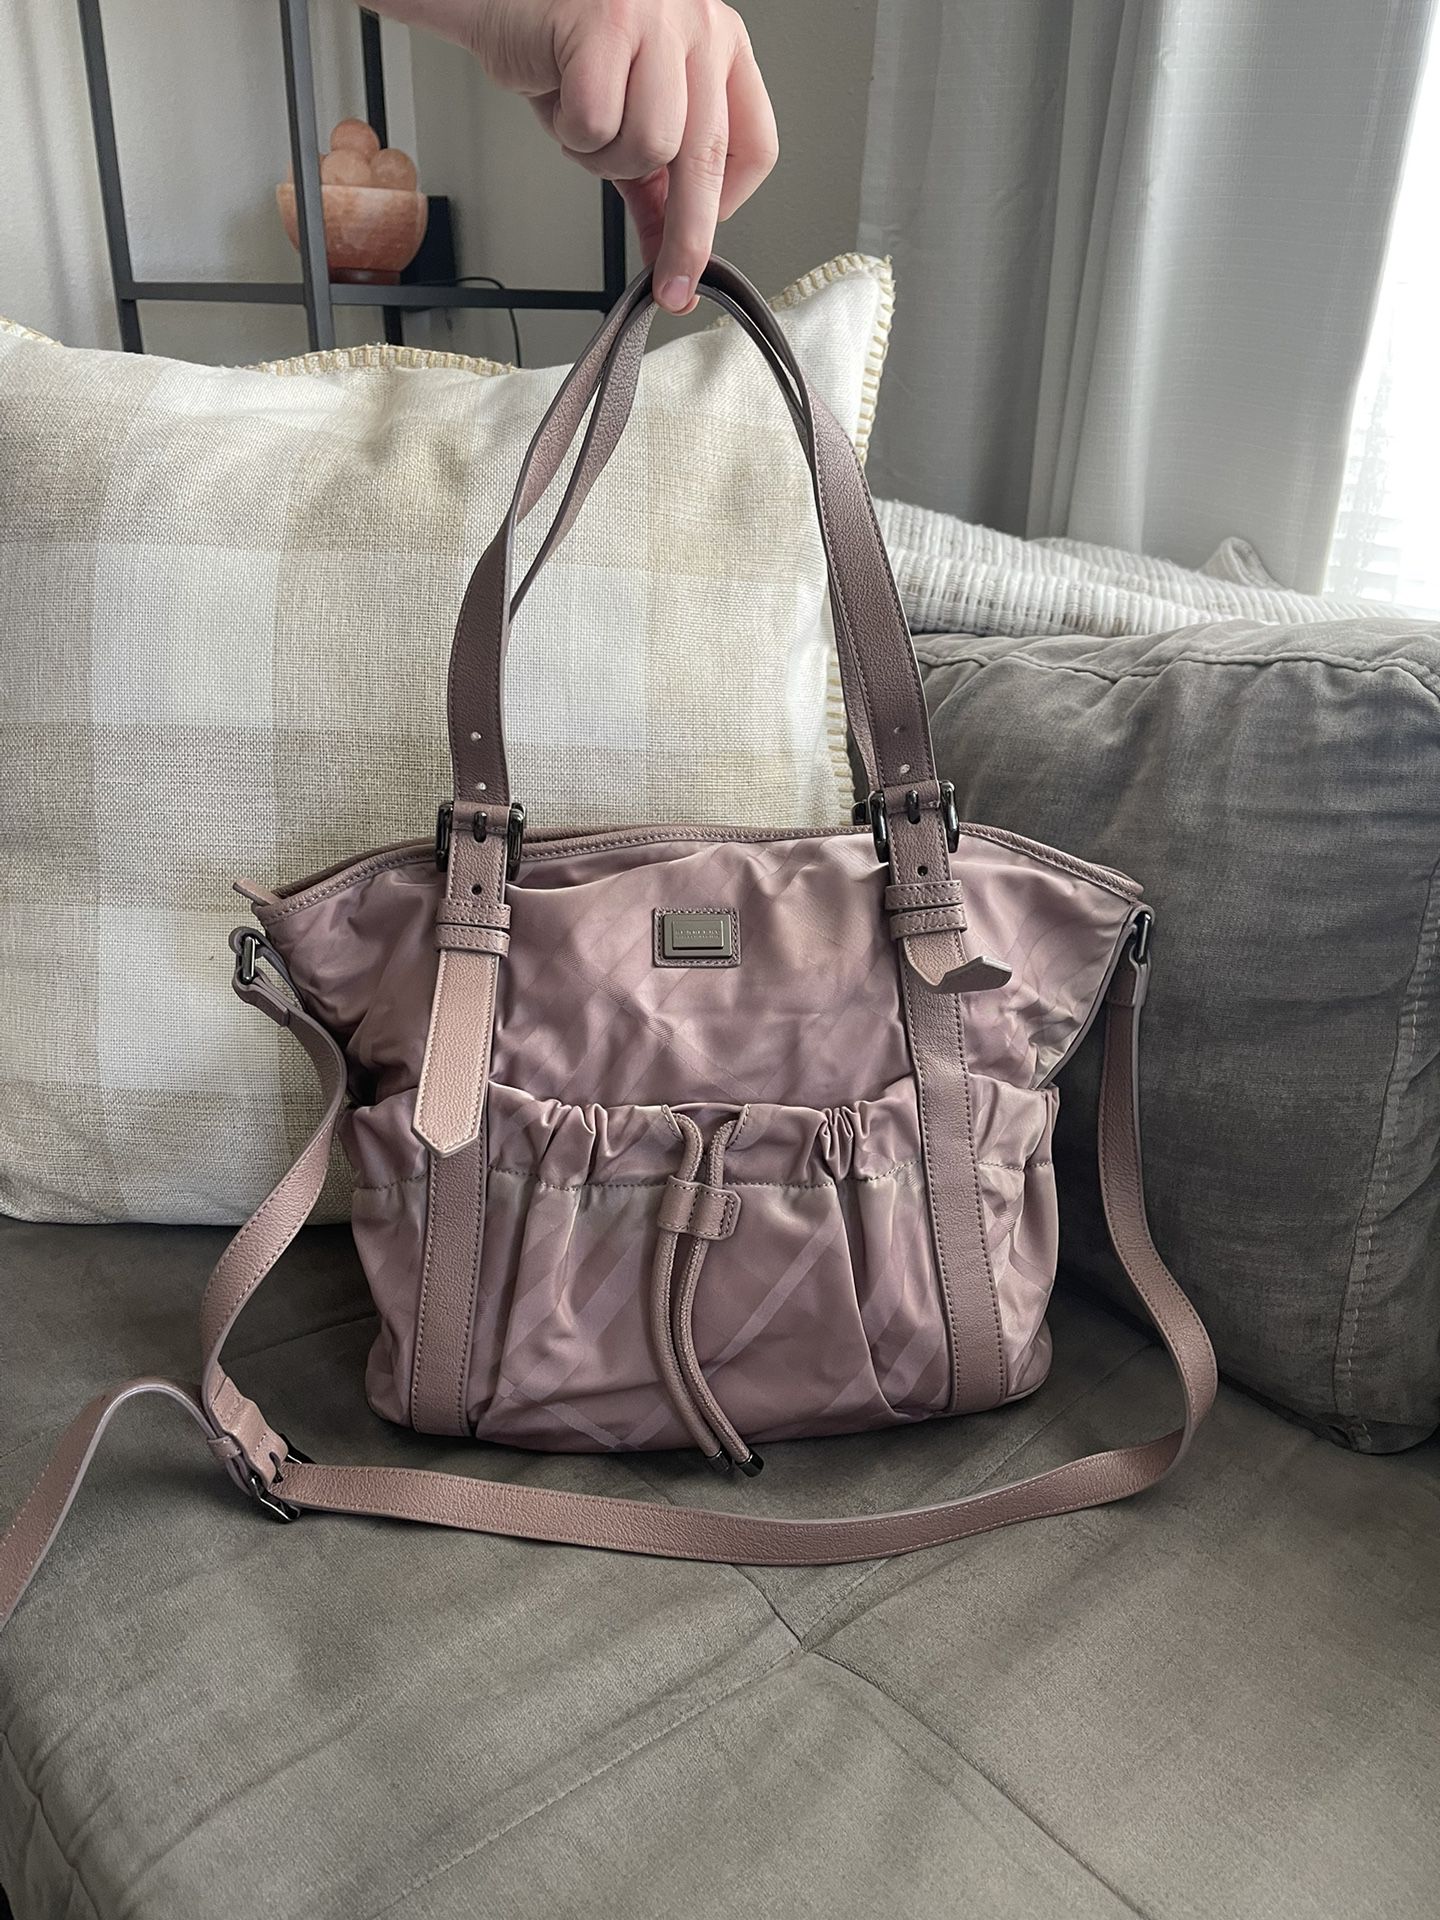 Dusty Pink Burberry Diaper Bag